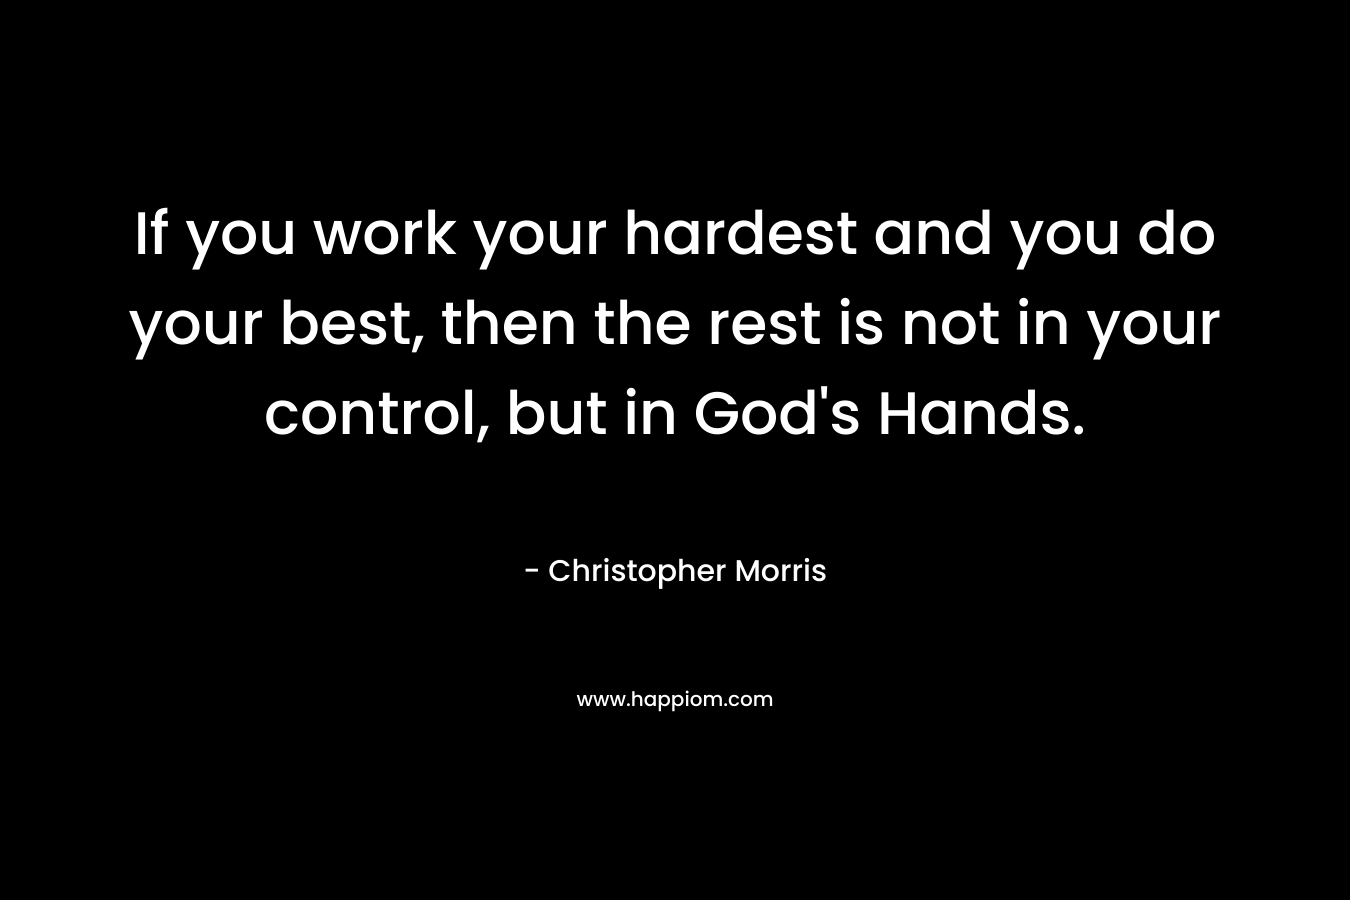 If you work your hardest and you do your best, then the rest is not in your control, but in God's Hands.